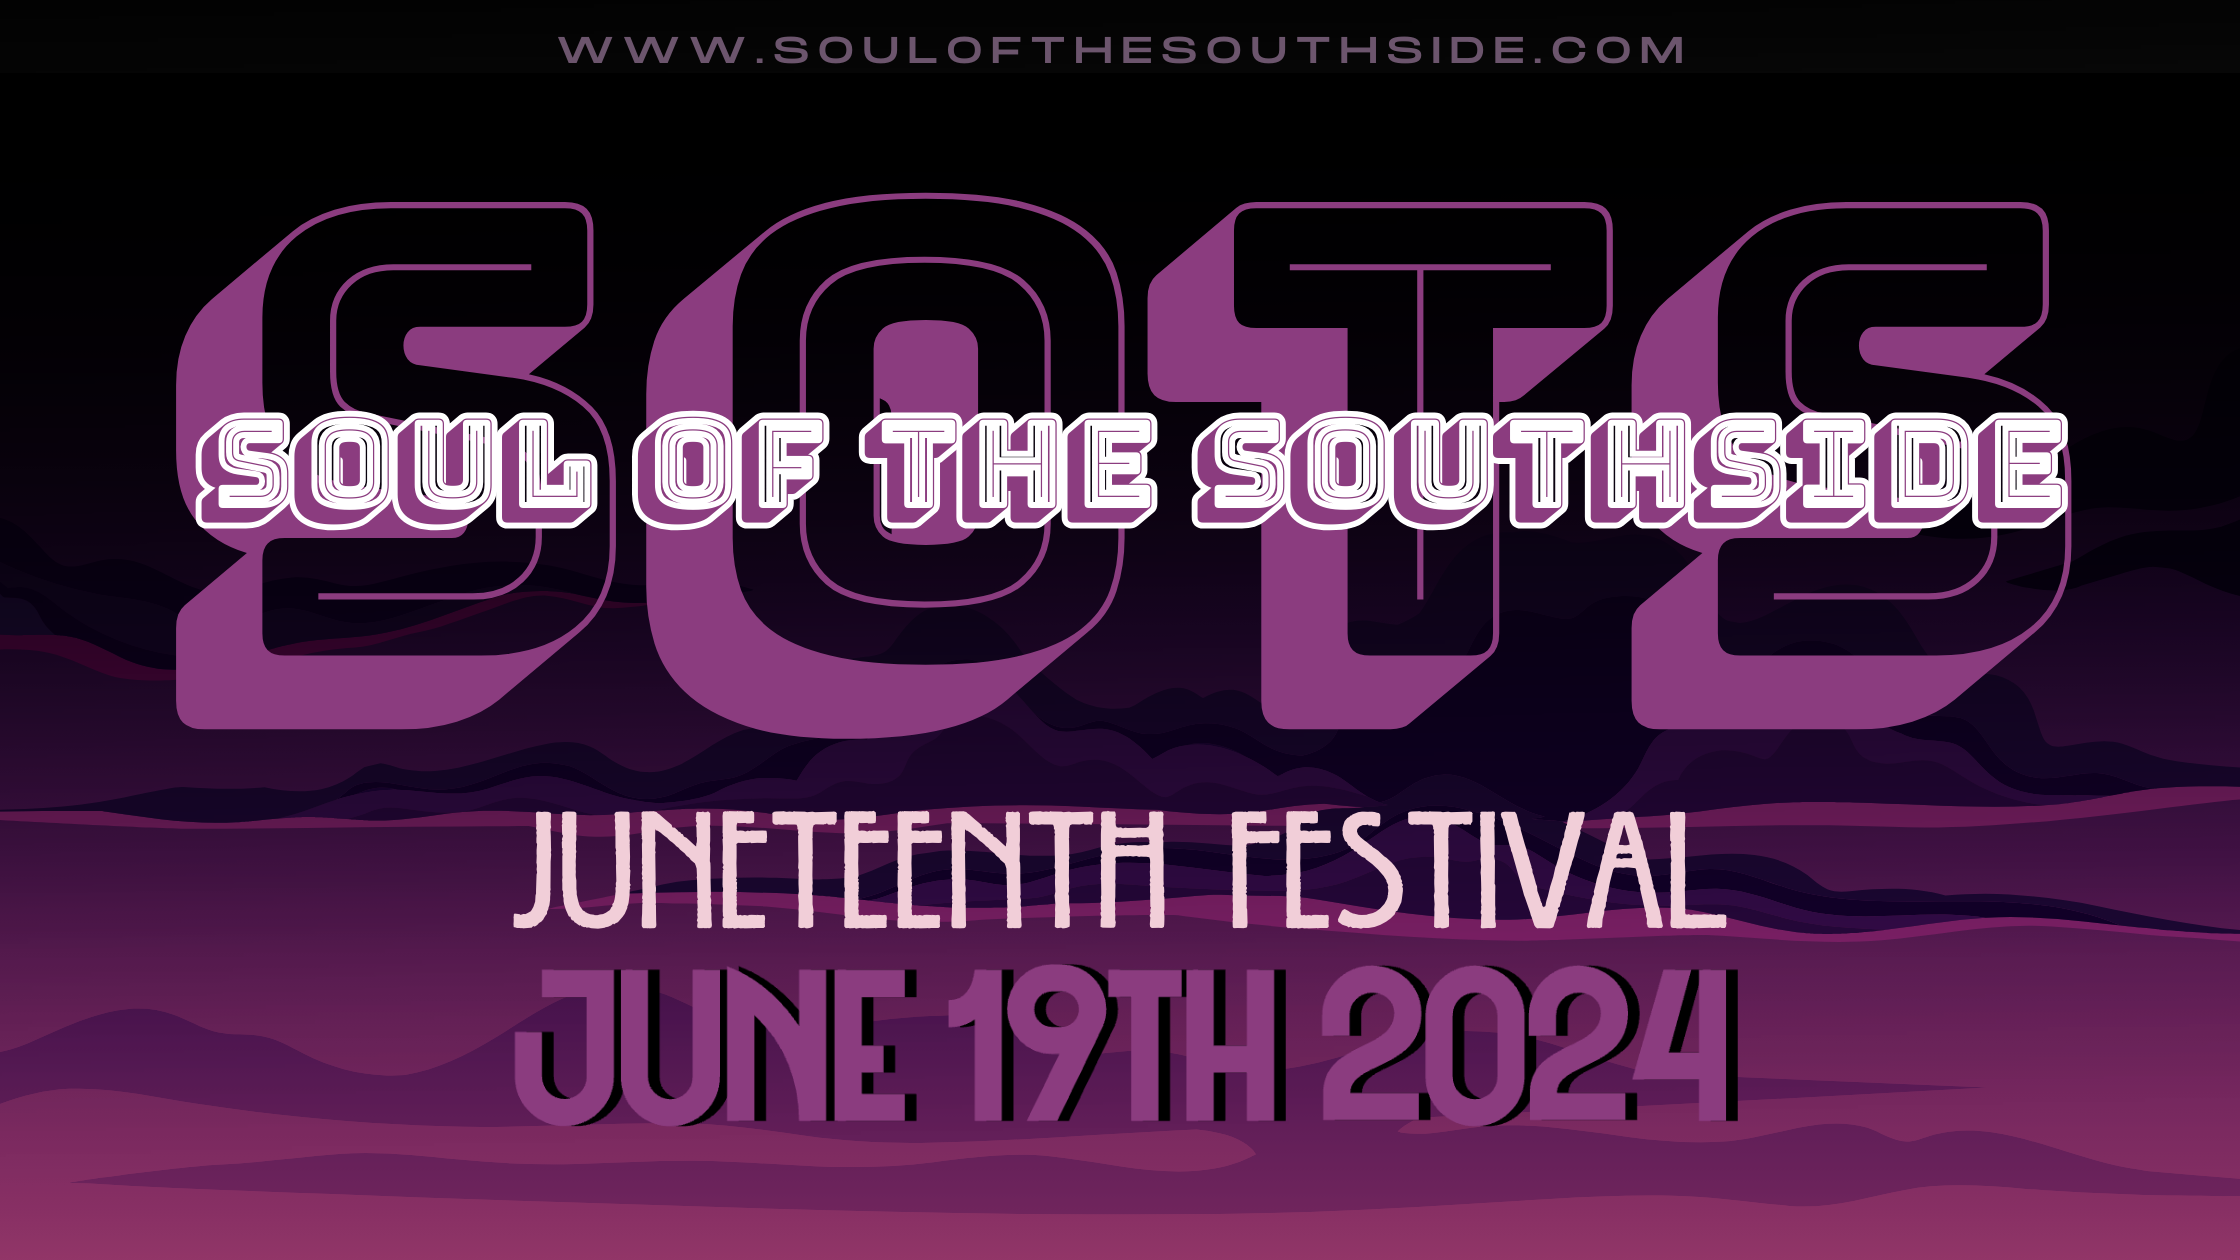 Soul of the Southside Juneteenth Festival Wednesday, June 19 The Hook and Ladder Theater, Arbeiter Brewing, Moon Palace Books, & The Coliseum Building 12:00PM - 8:00PM :: FREE